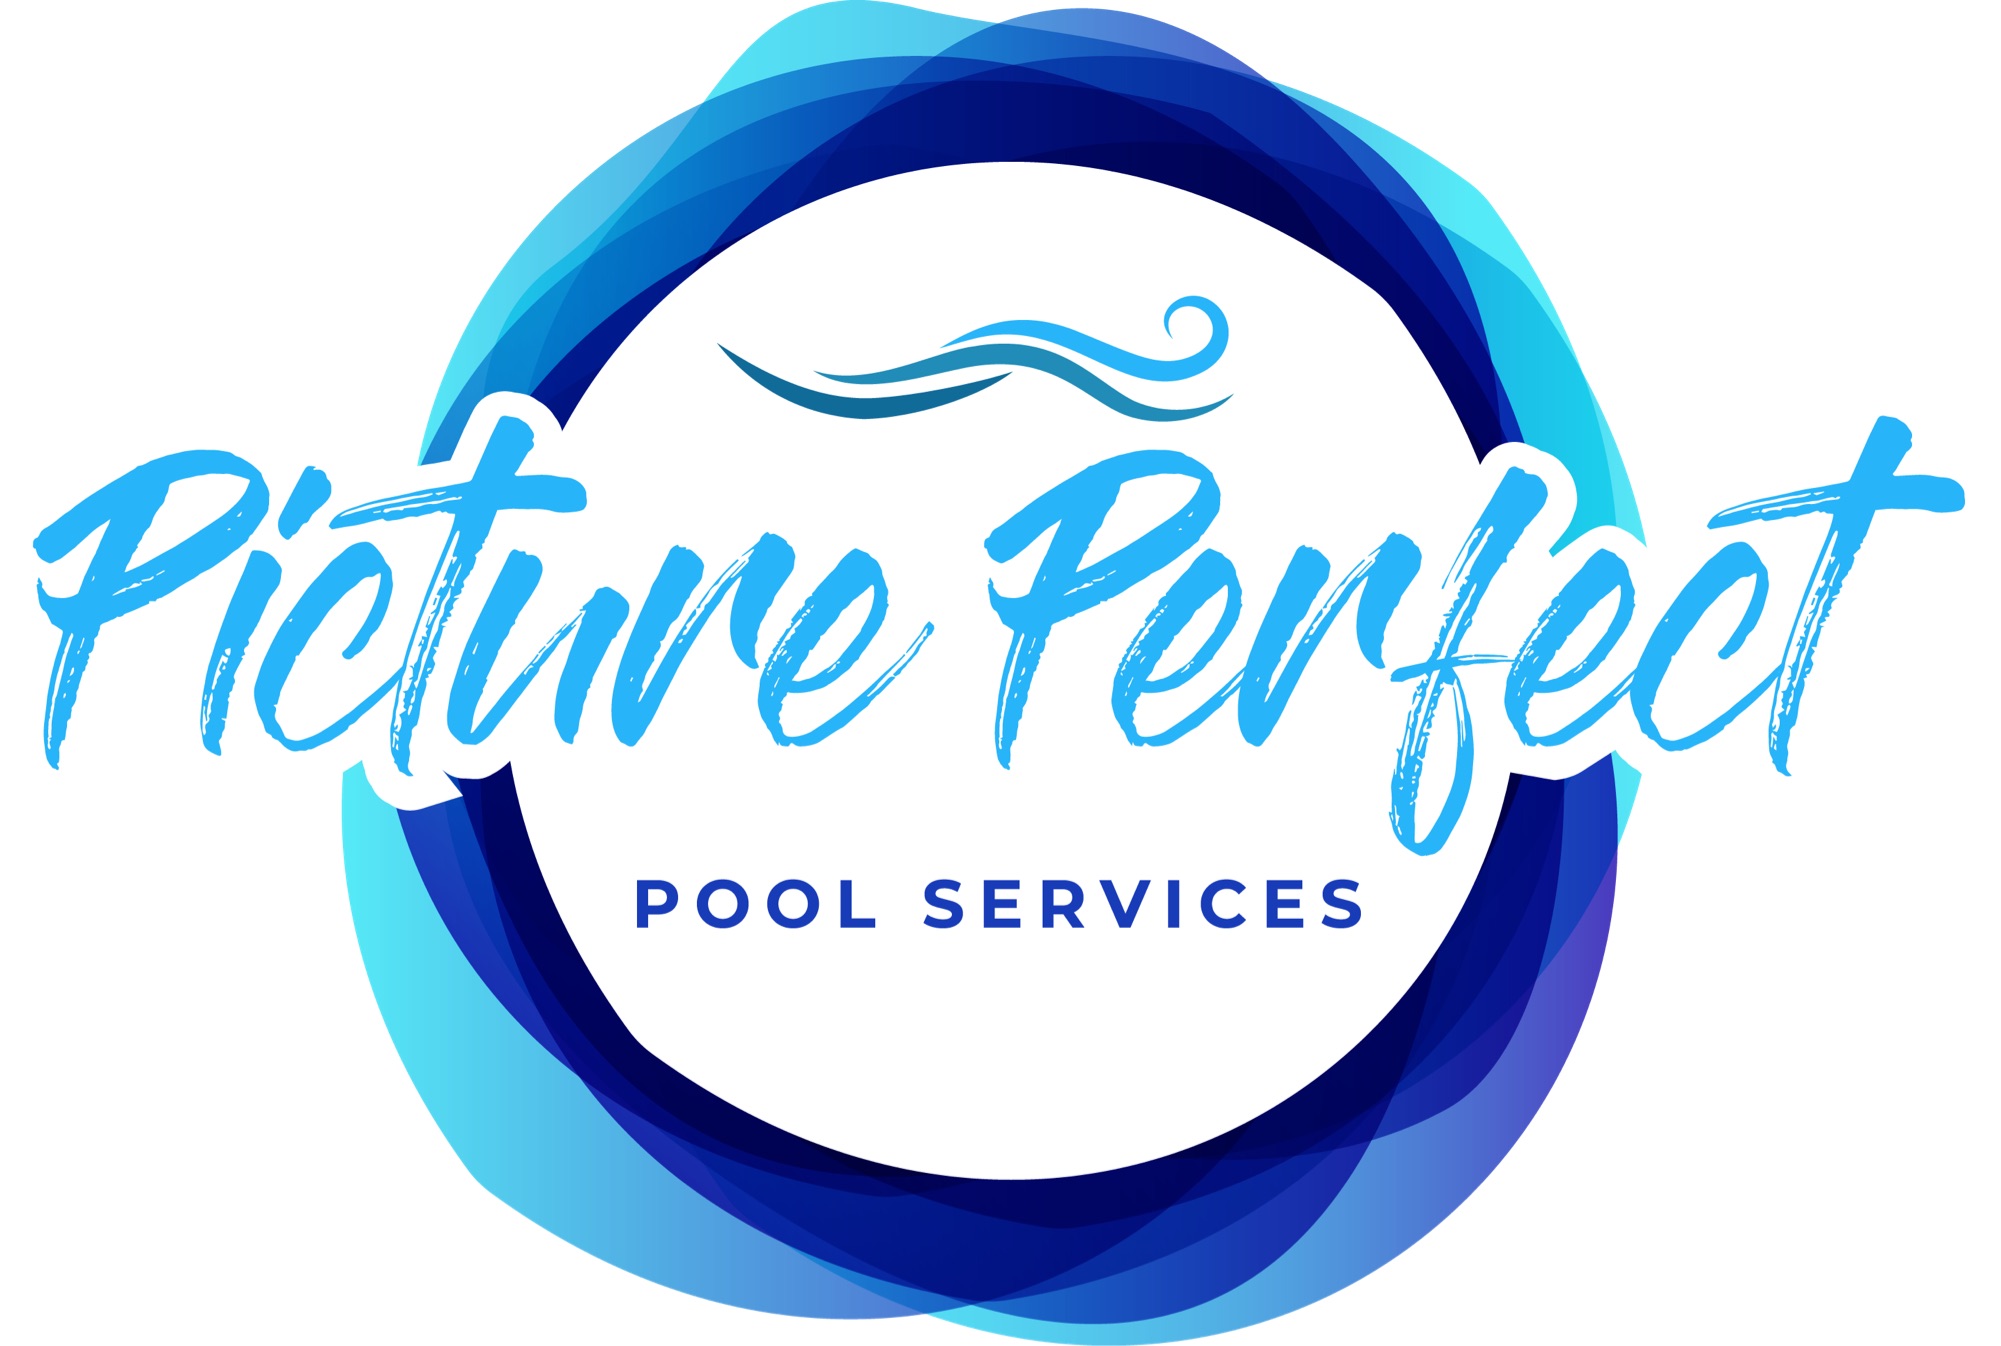 Picture-Perfect Pool Service Logo